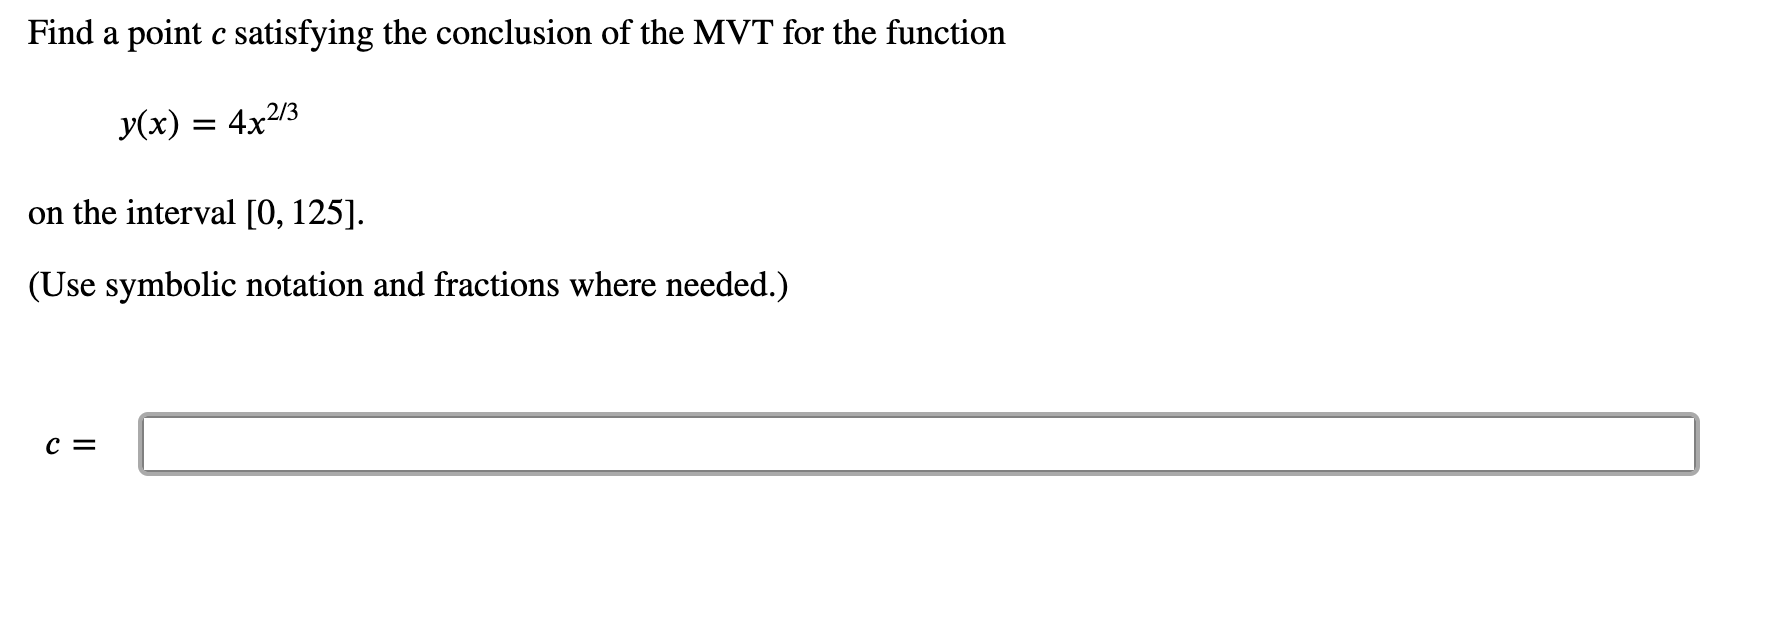 Find a point c satisfying the conclusion of the MVT for the function
y(x) = 4x/3
on the interval [0, 125].
